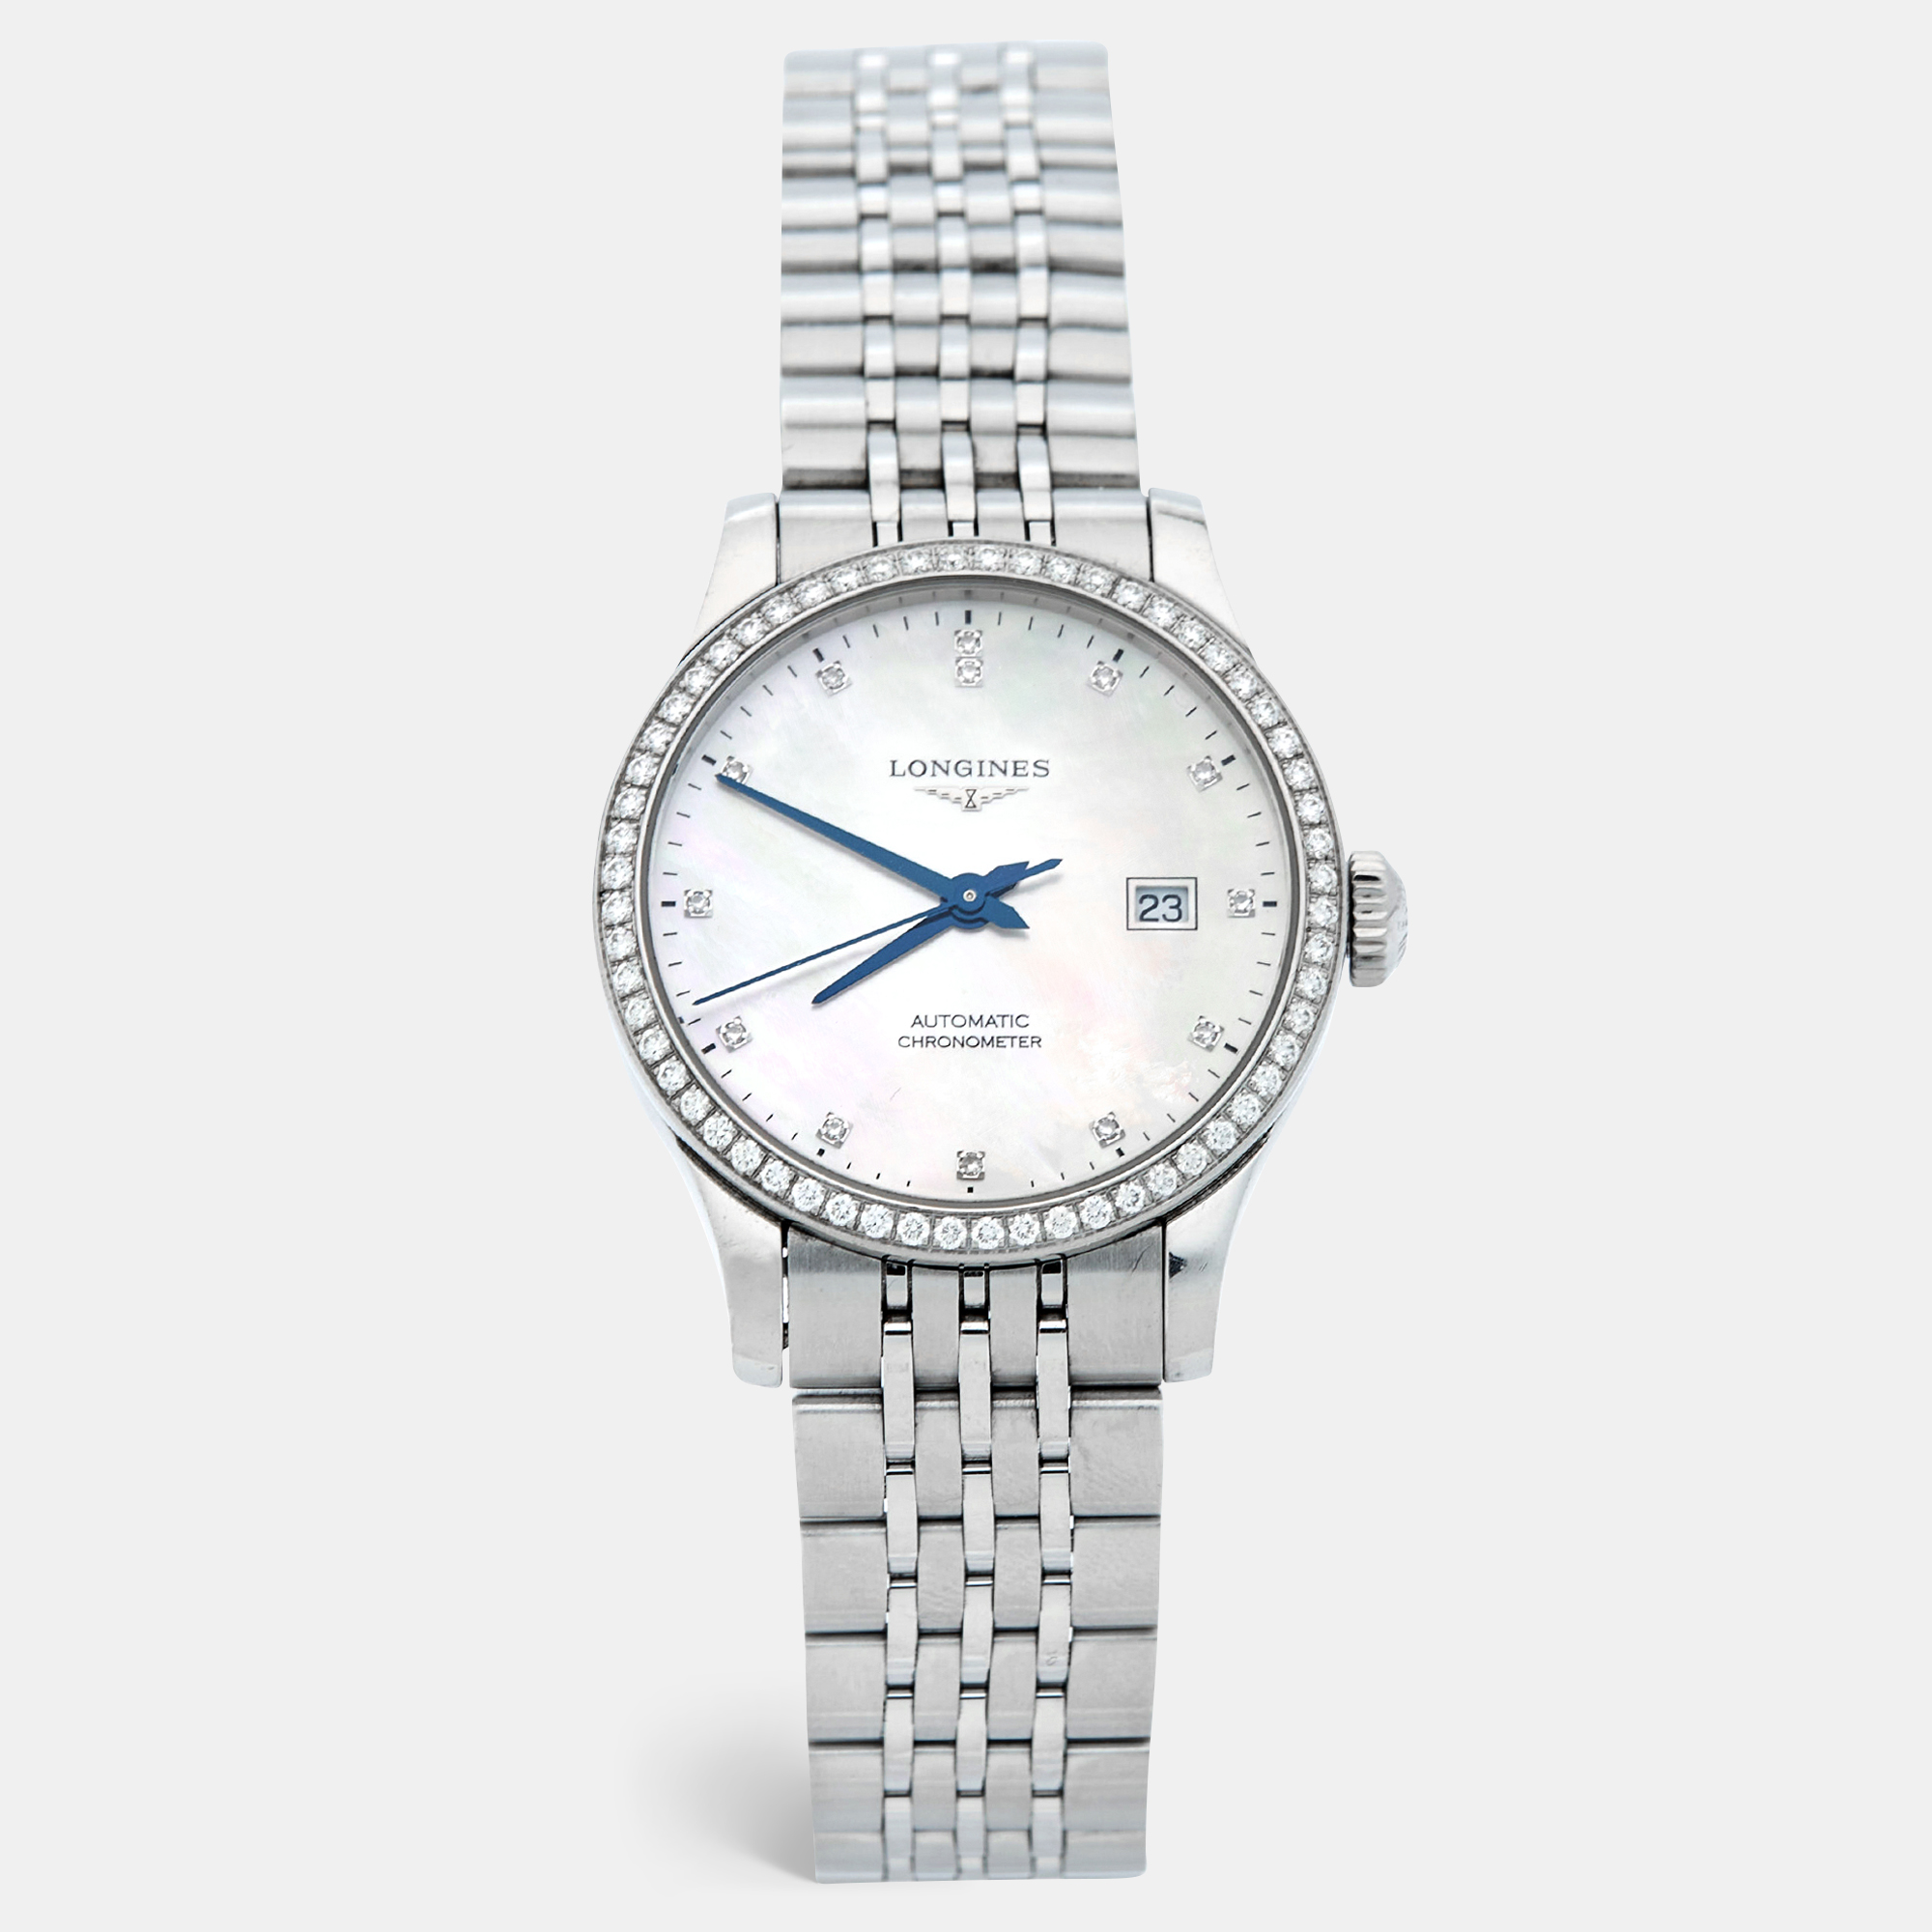 Longines mother of pearl diamond stainless steel record l23210876 women's wristwatch 30 mm